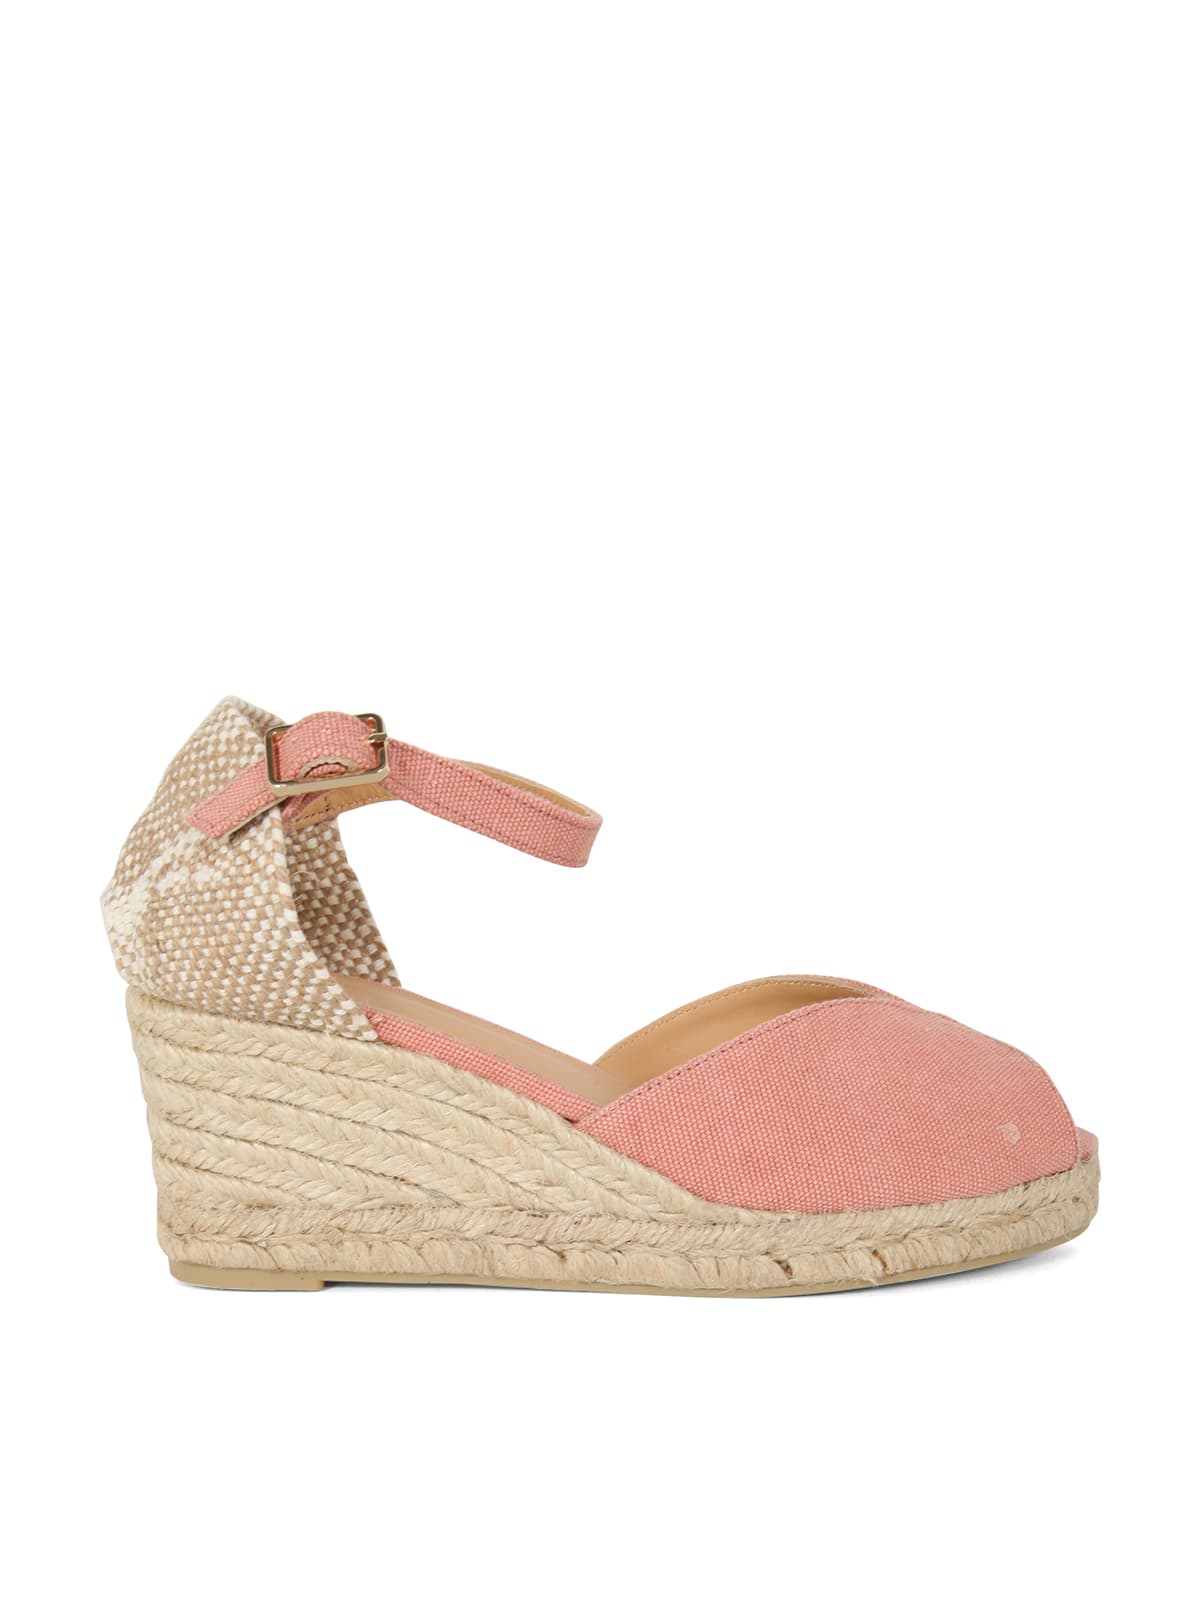 Castañer Bianca Espadrilles With Belt On Ankles And Heart-shaped Upper Part